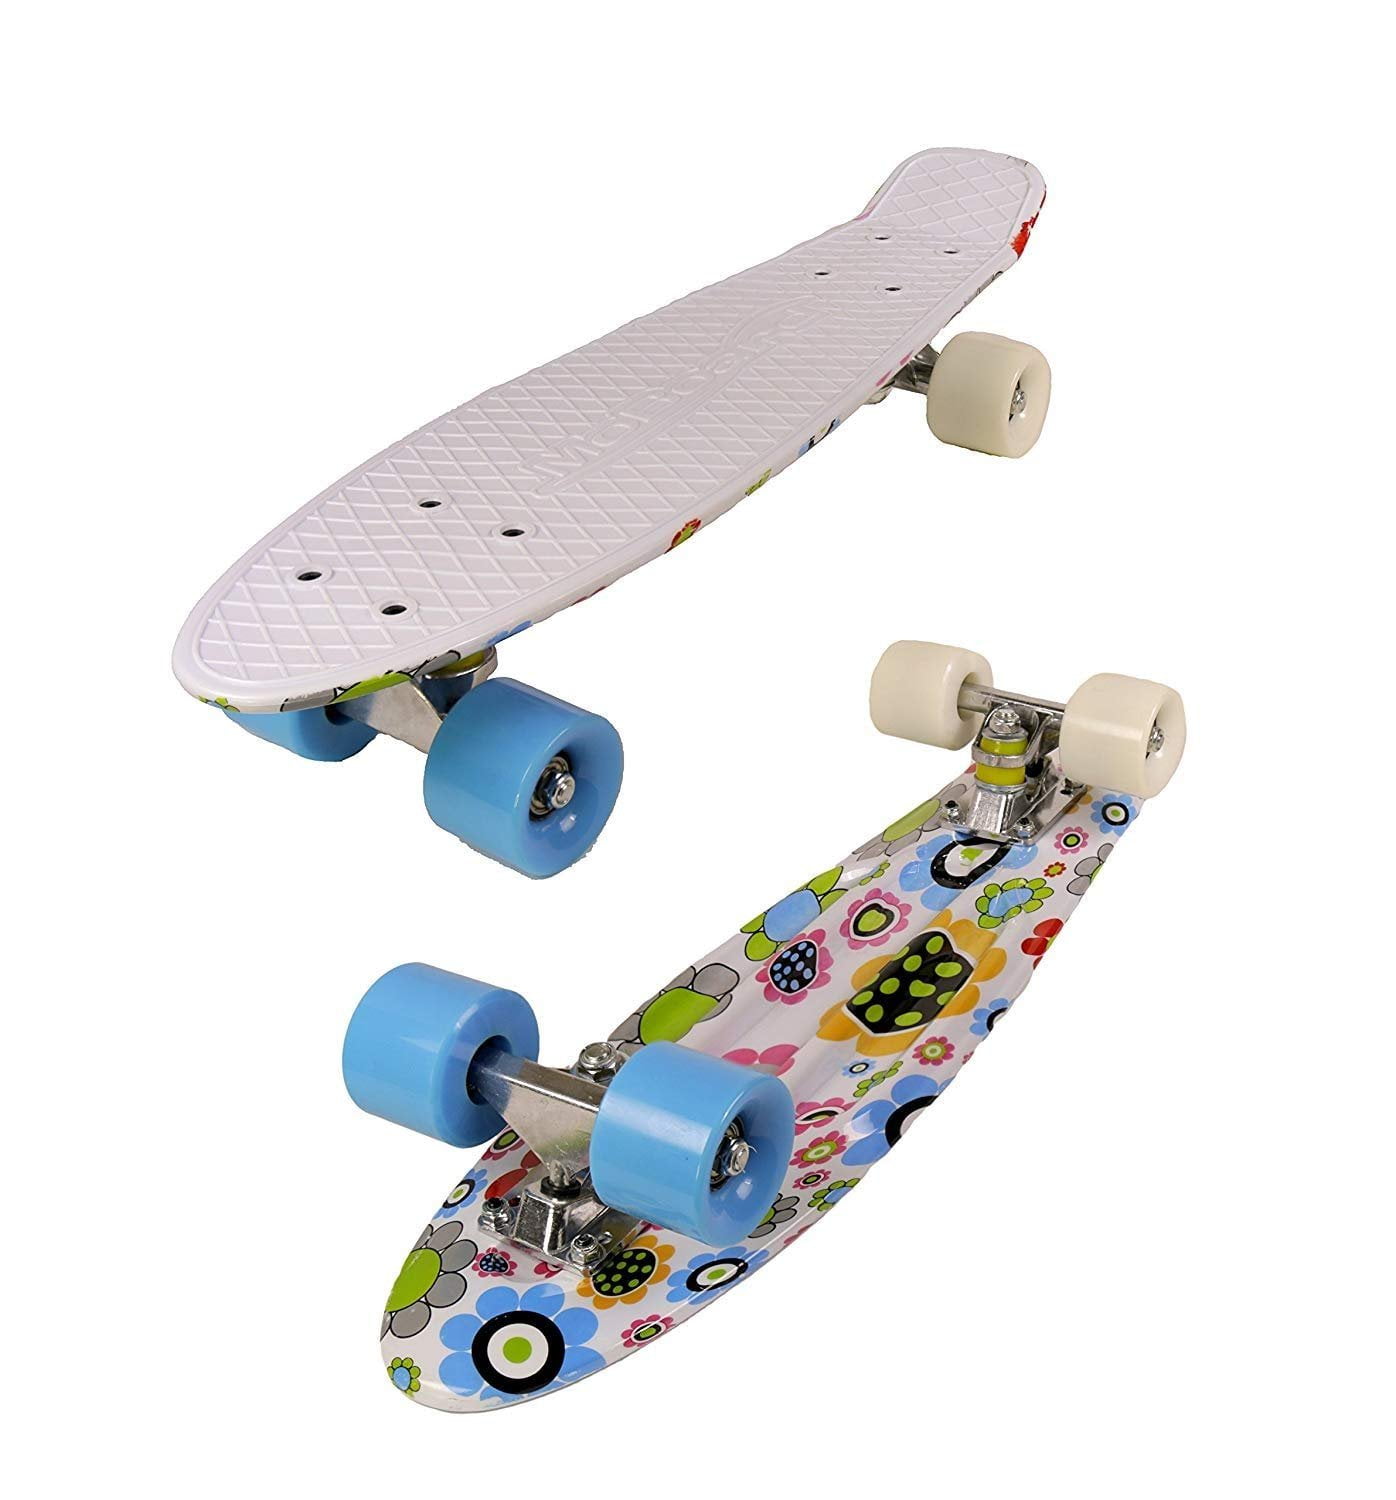 pålidelighed Perth Blackborough støn MoBoard Graphic Complete Skateboard | Pro/Beginner | 22 inch Vintage Style  with Interchangeable Wheels (White Top/Graphic - Blue/White) - Walmart.com